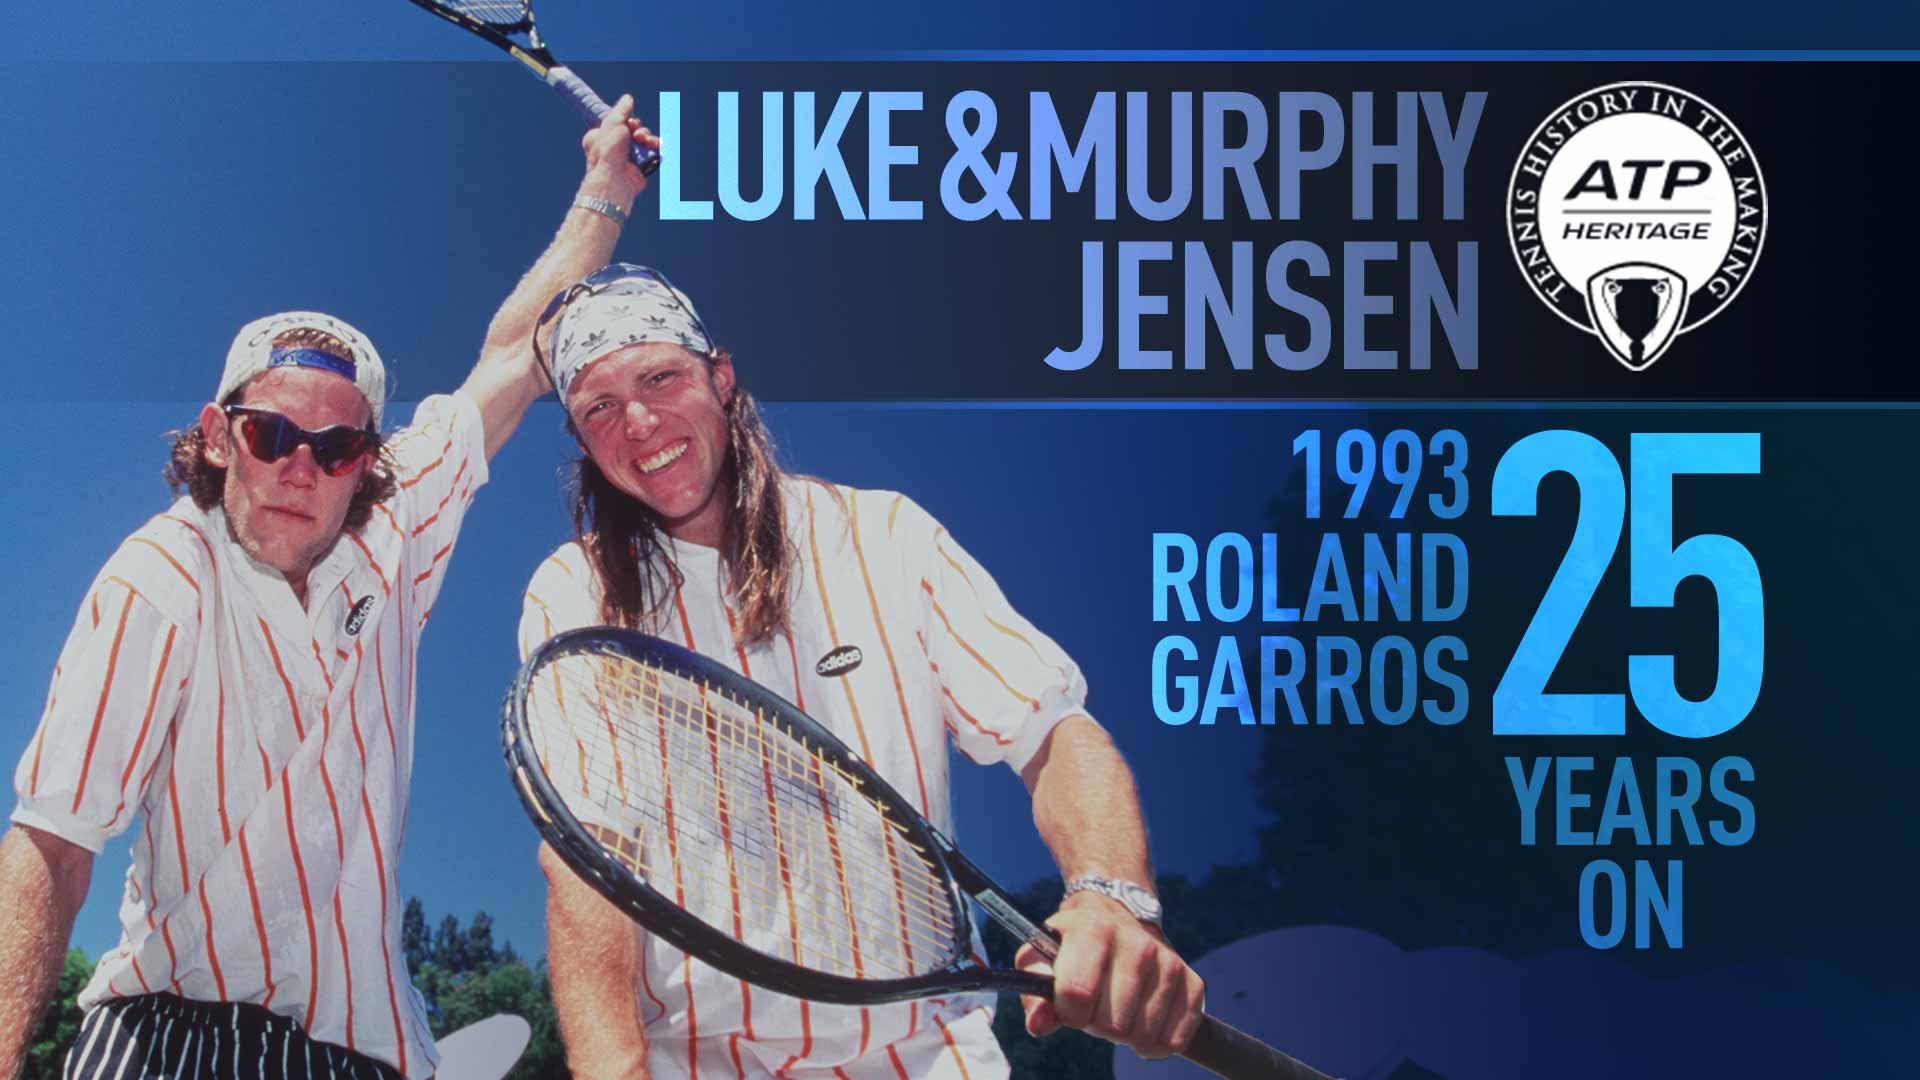 American brothers Luke and Murphy Jensen recovered from a 0-3 deficit in the third set of the 1993 Roland Garros final.